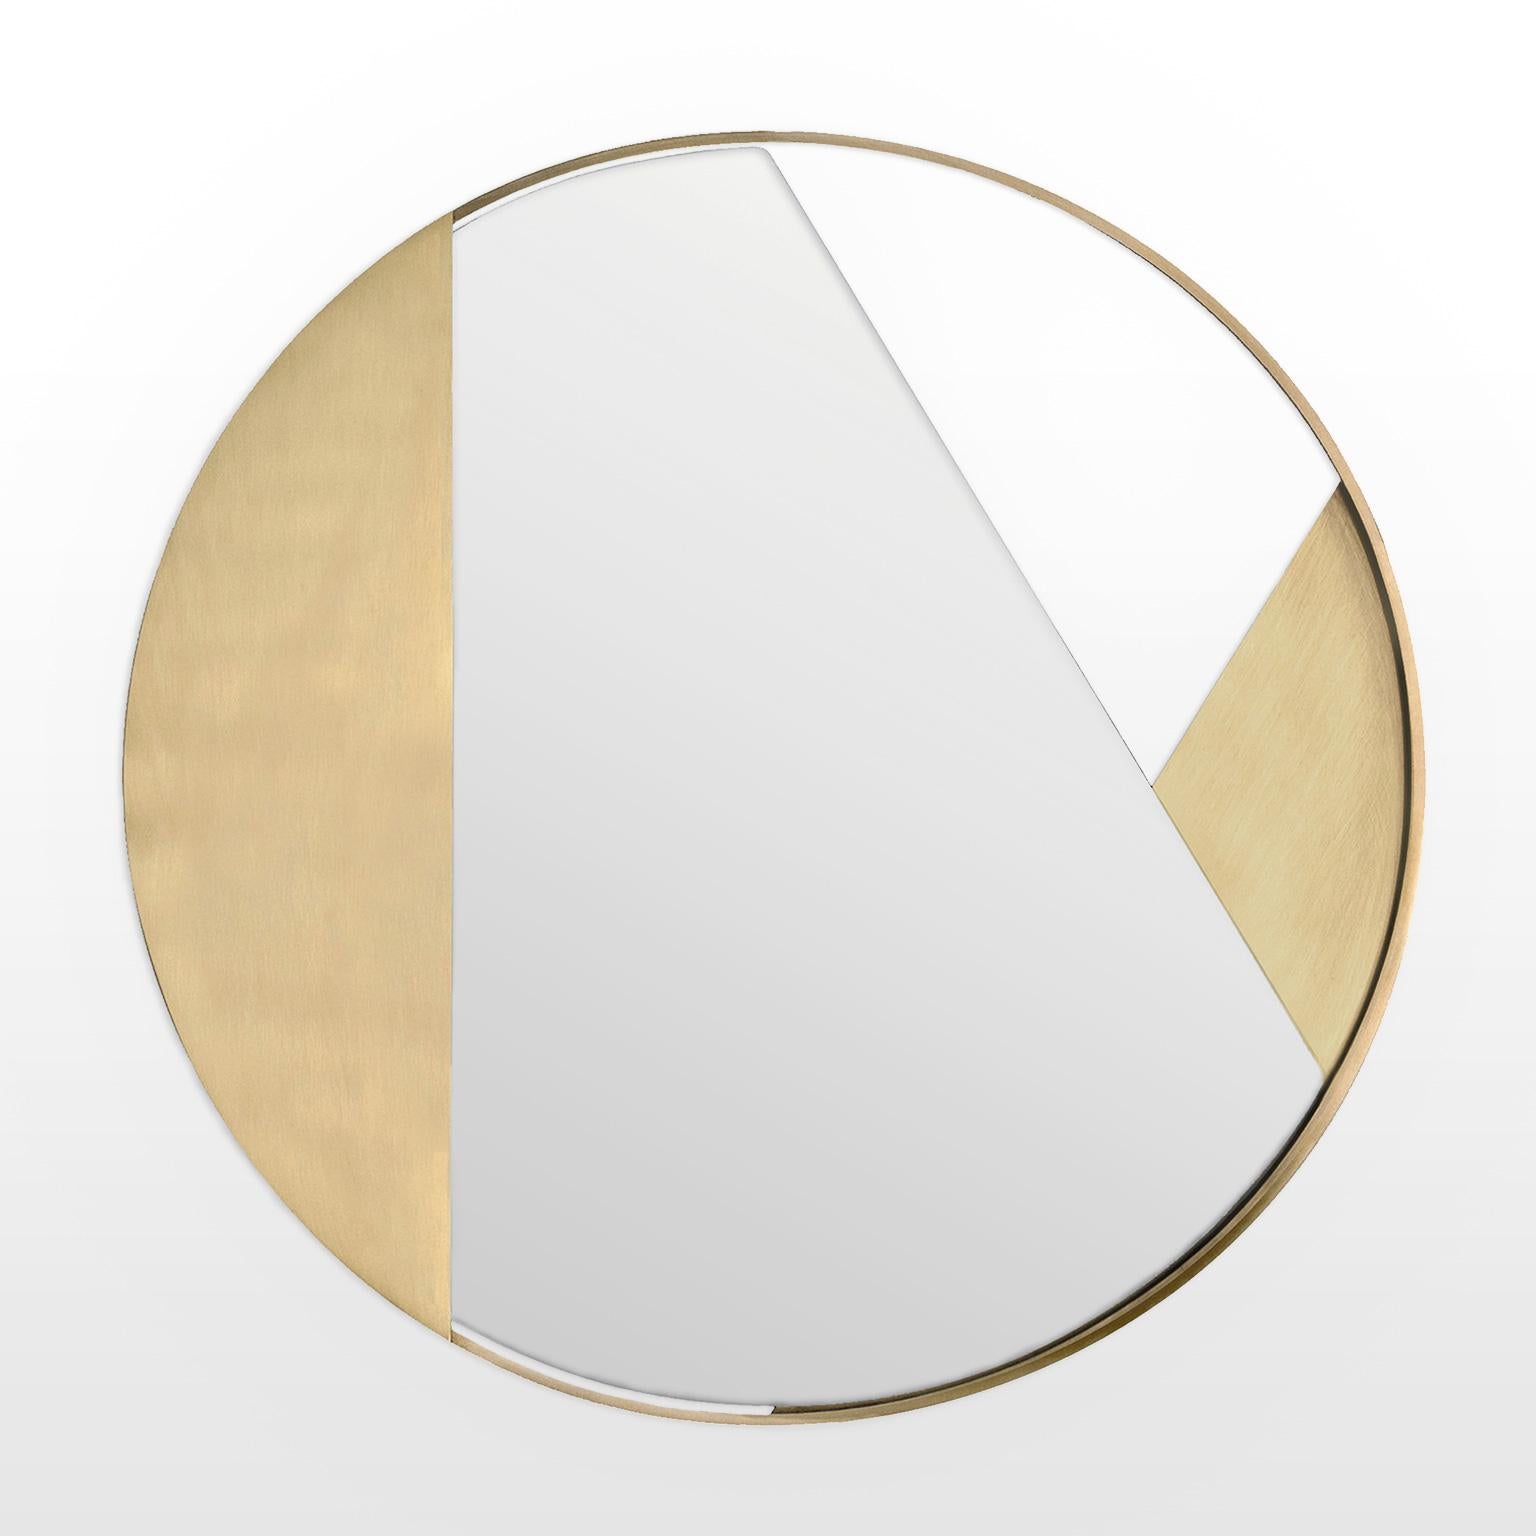 Revolution V2 is a 21st Century mirror of 90 cm diameter, made by Italian artisans in different shades and colors. It is part of the collectible design language Revolution that has been developed by the Edizione Limitata's art research team in